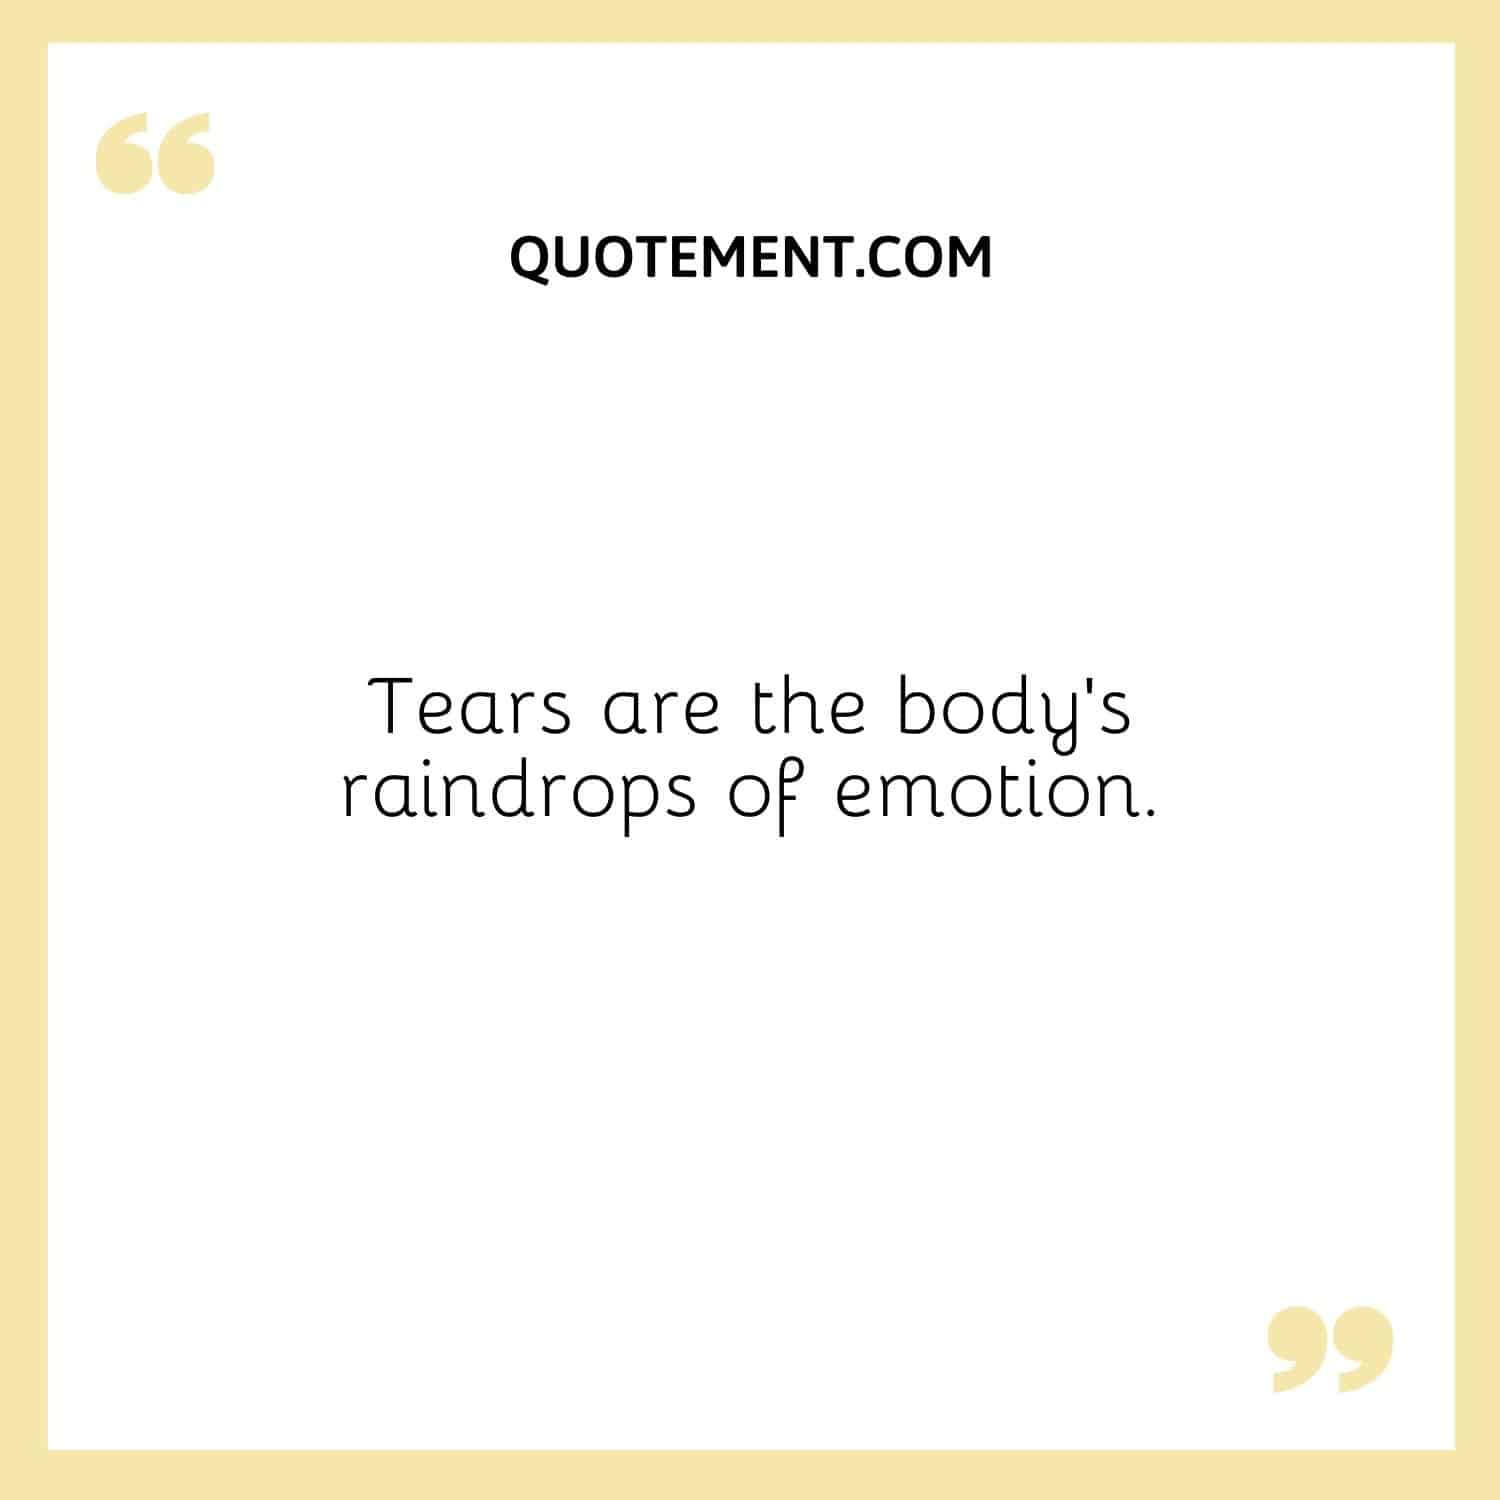 Tears are the body’s raindrops of emotion.